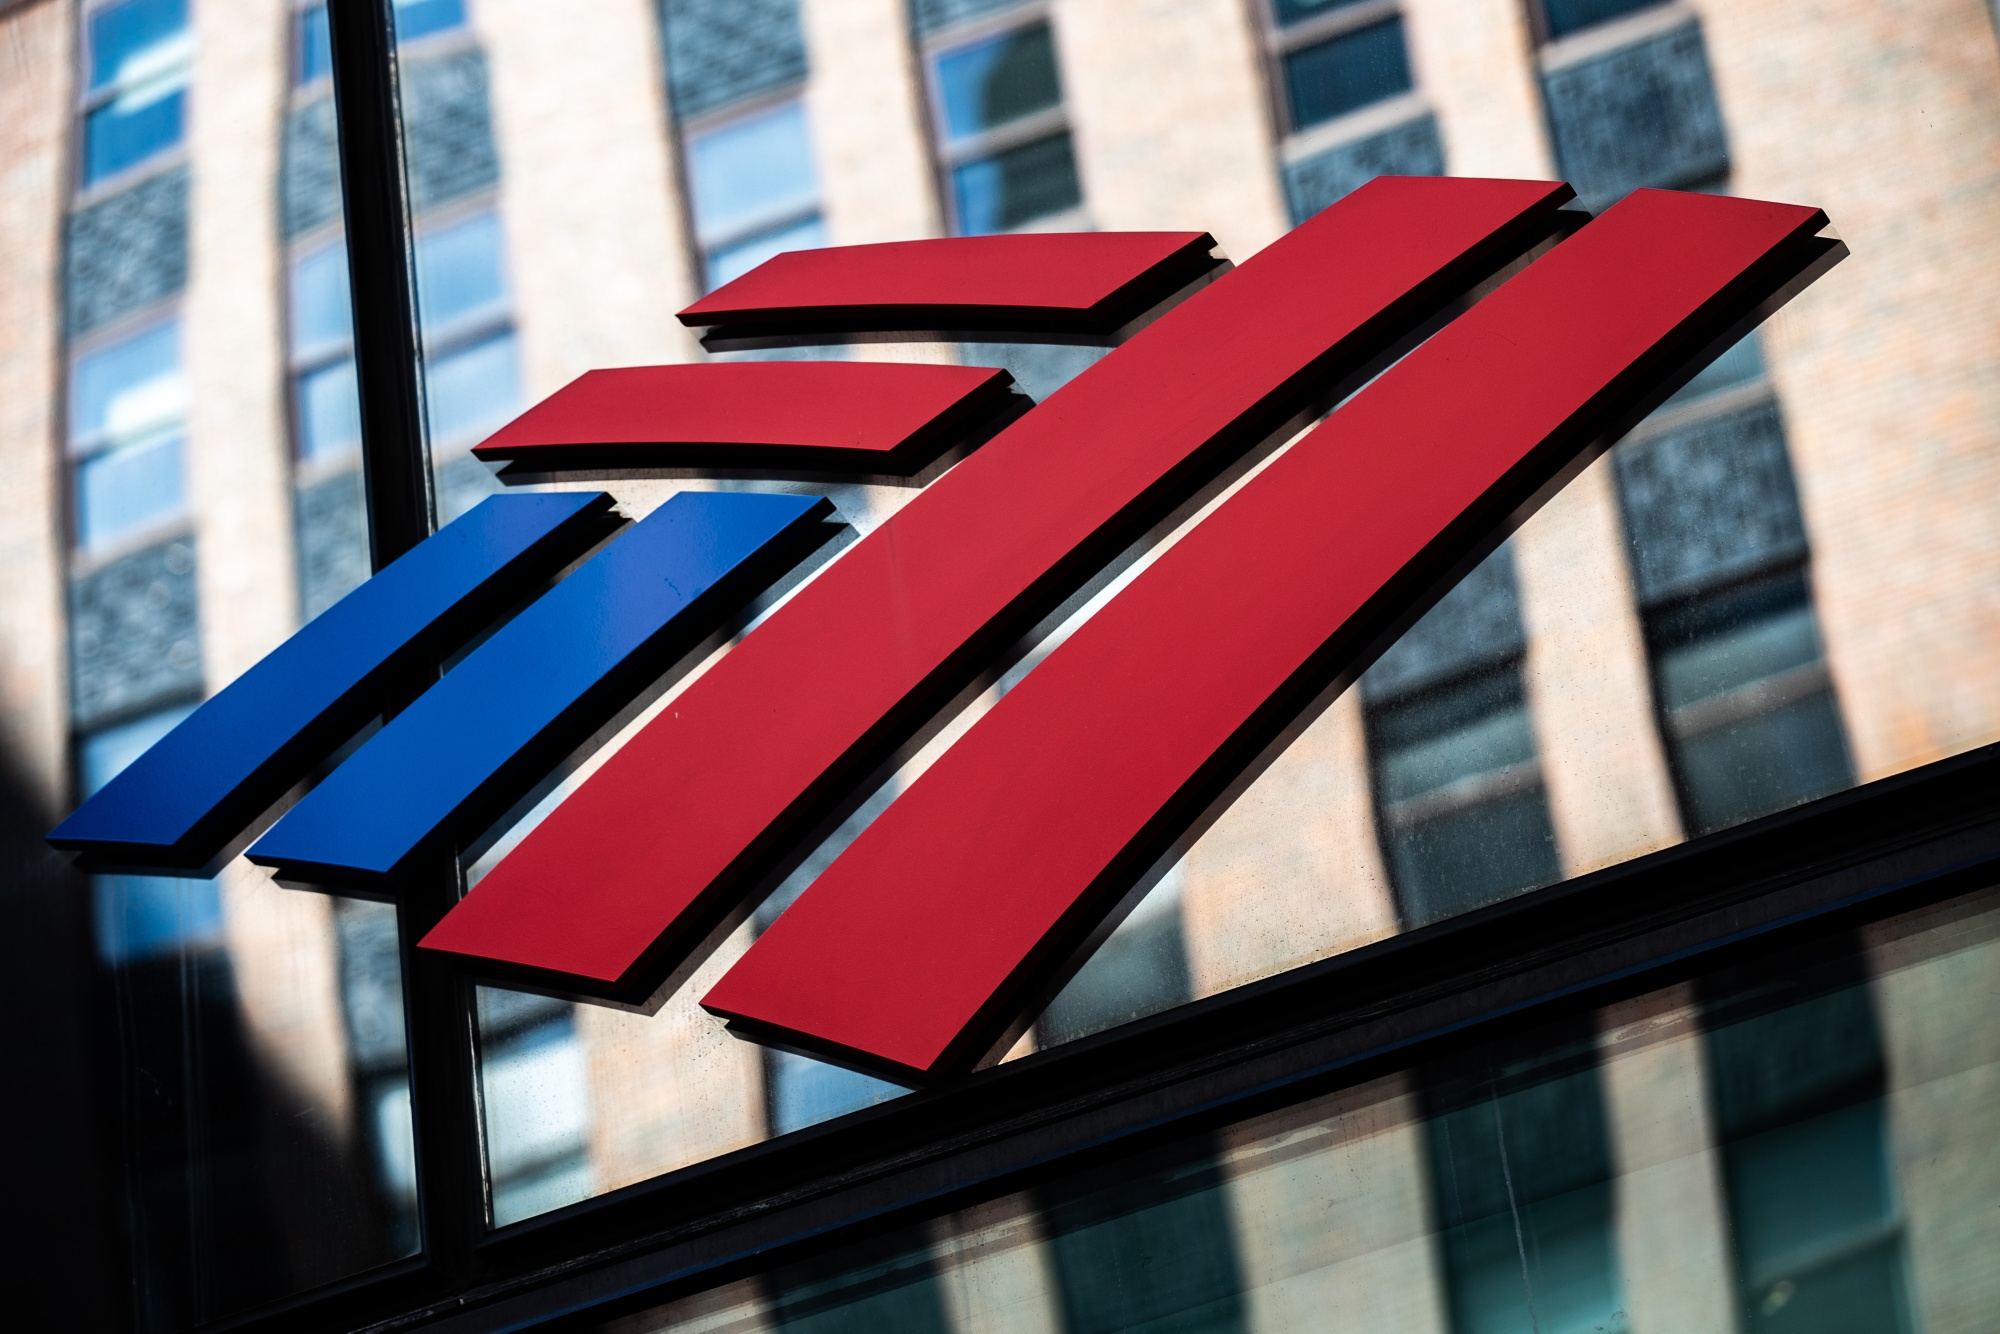 Bank of America Corp. signage is displayed at a branch in New York.